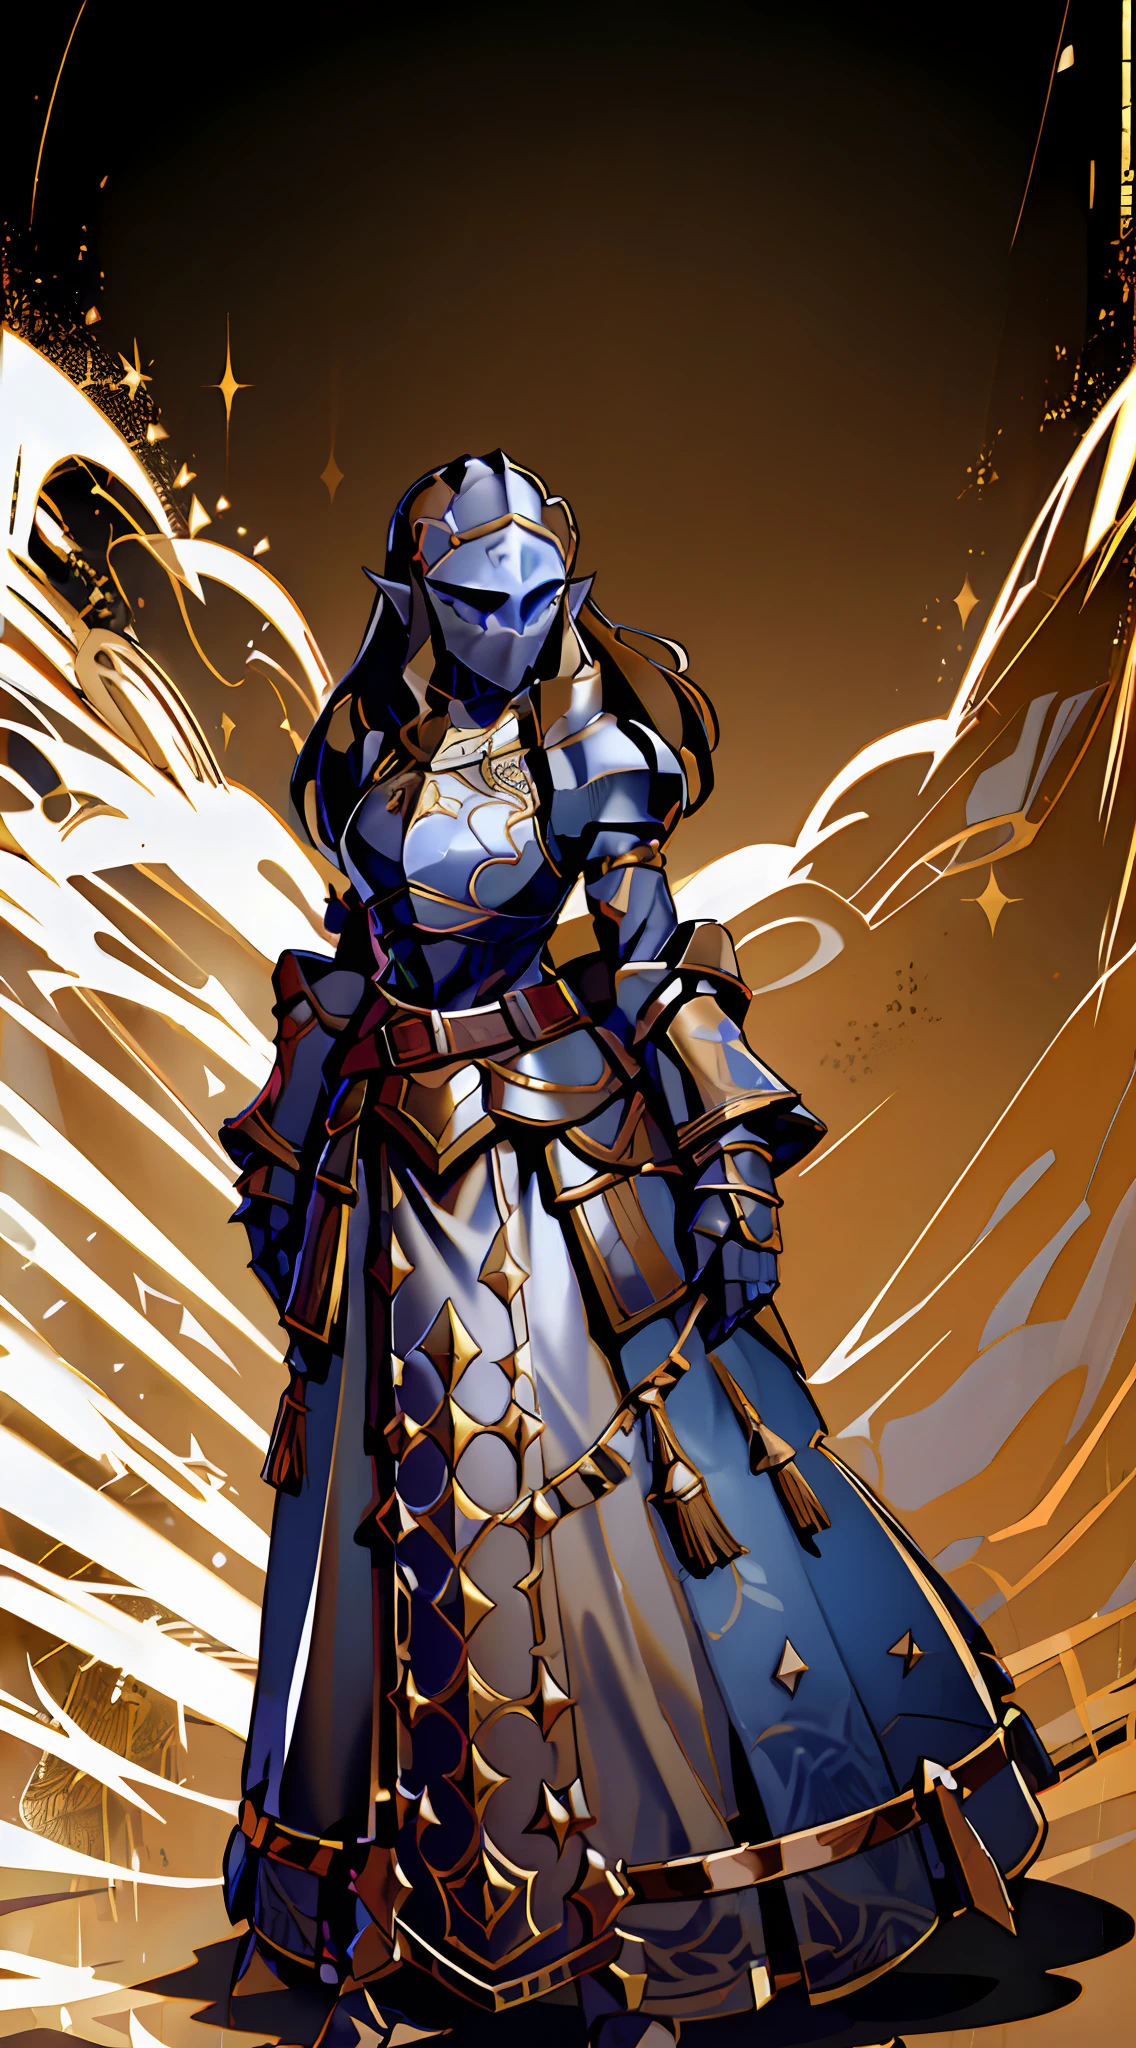 Botw Zelda wearing Heavy knight armor, Botw Themed Knight armor, Royal blue and gold armor, thick armor plating, Gold accents with brown straps, brown belt with gold accents, Heavy Blue armor, Armored dress, Large knight armor, form-fitting knight armor